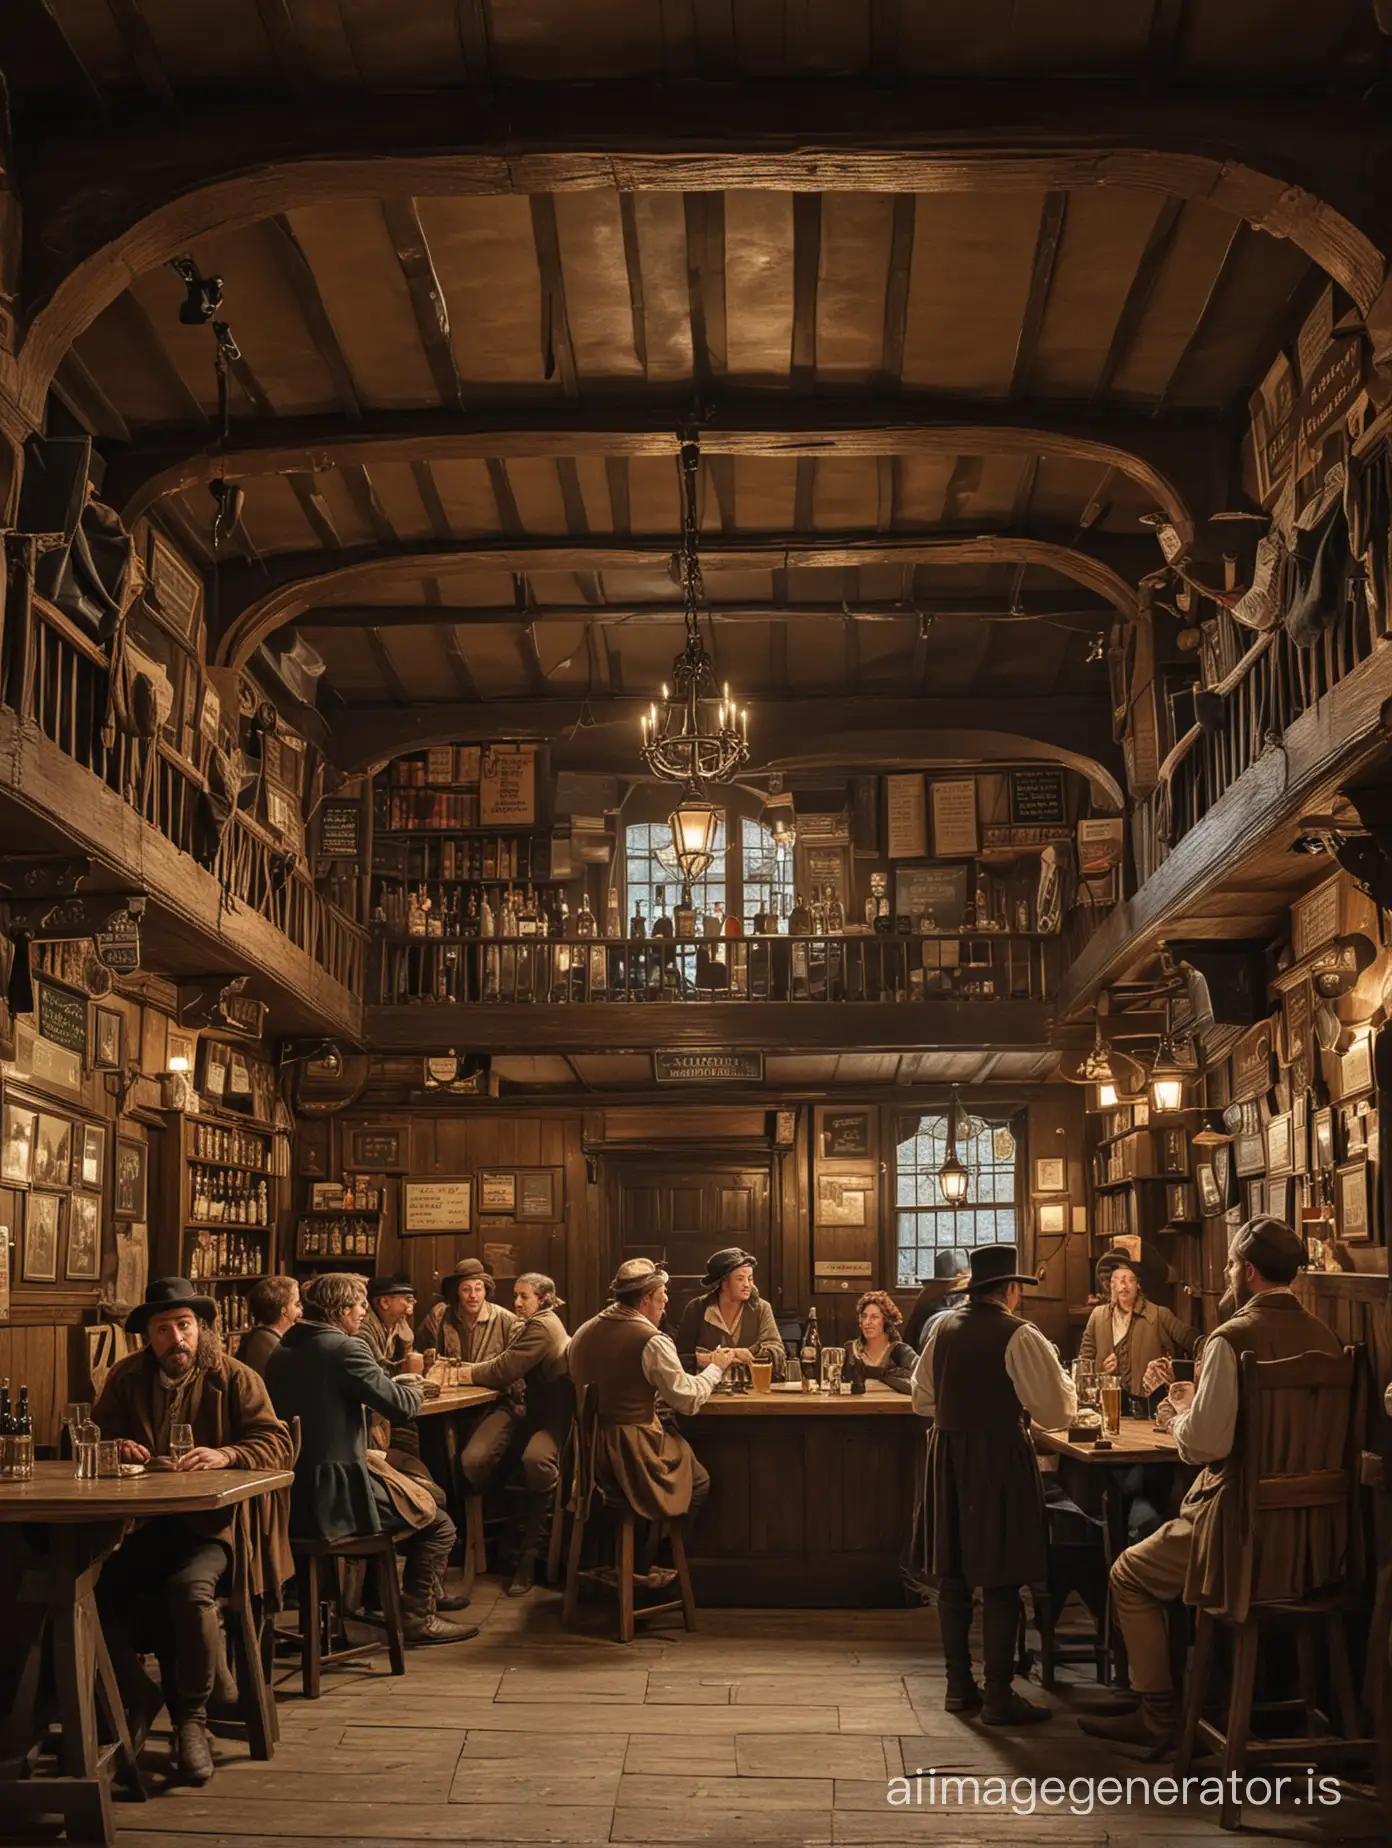 Patrons-Enjoying-Drinks-and-Conversations-in-a-Historic-English-Pub